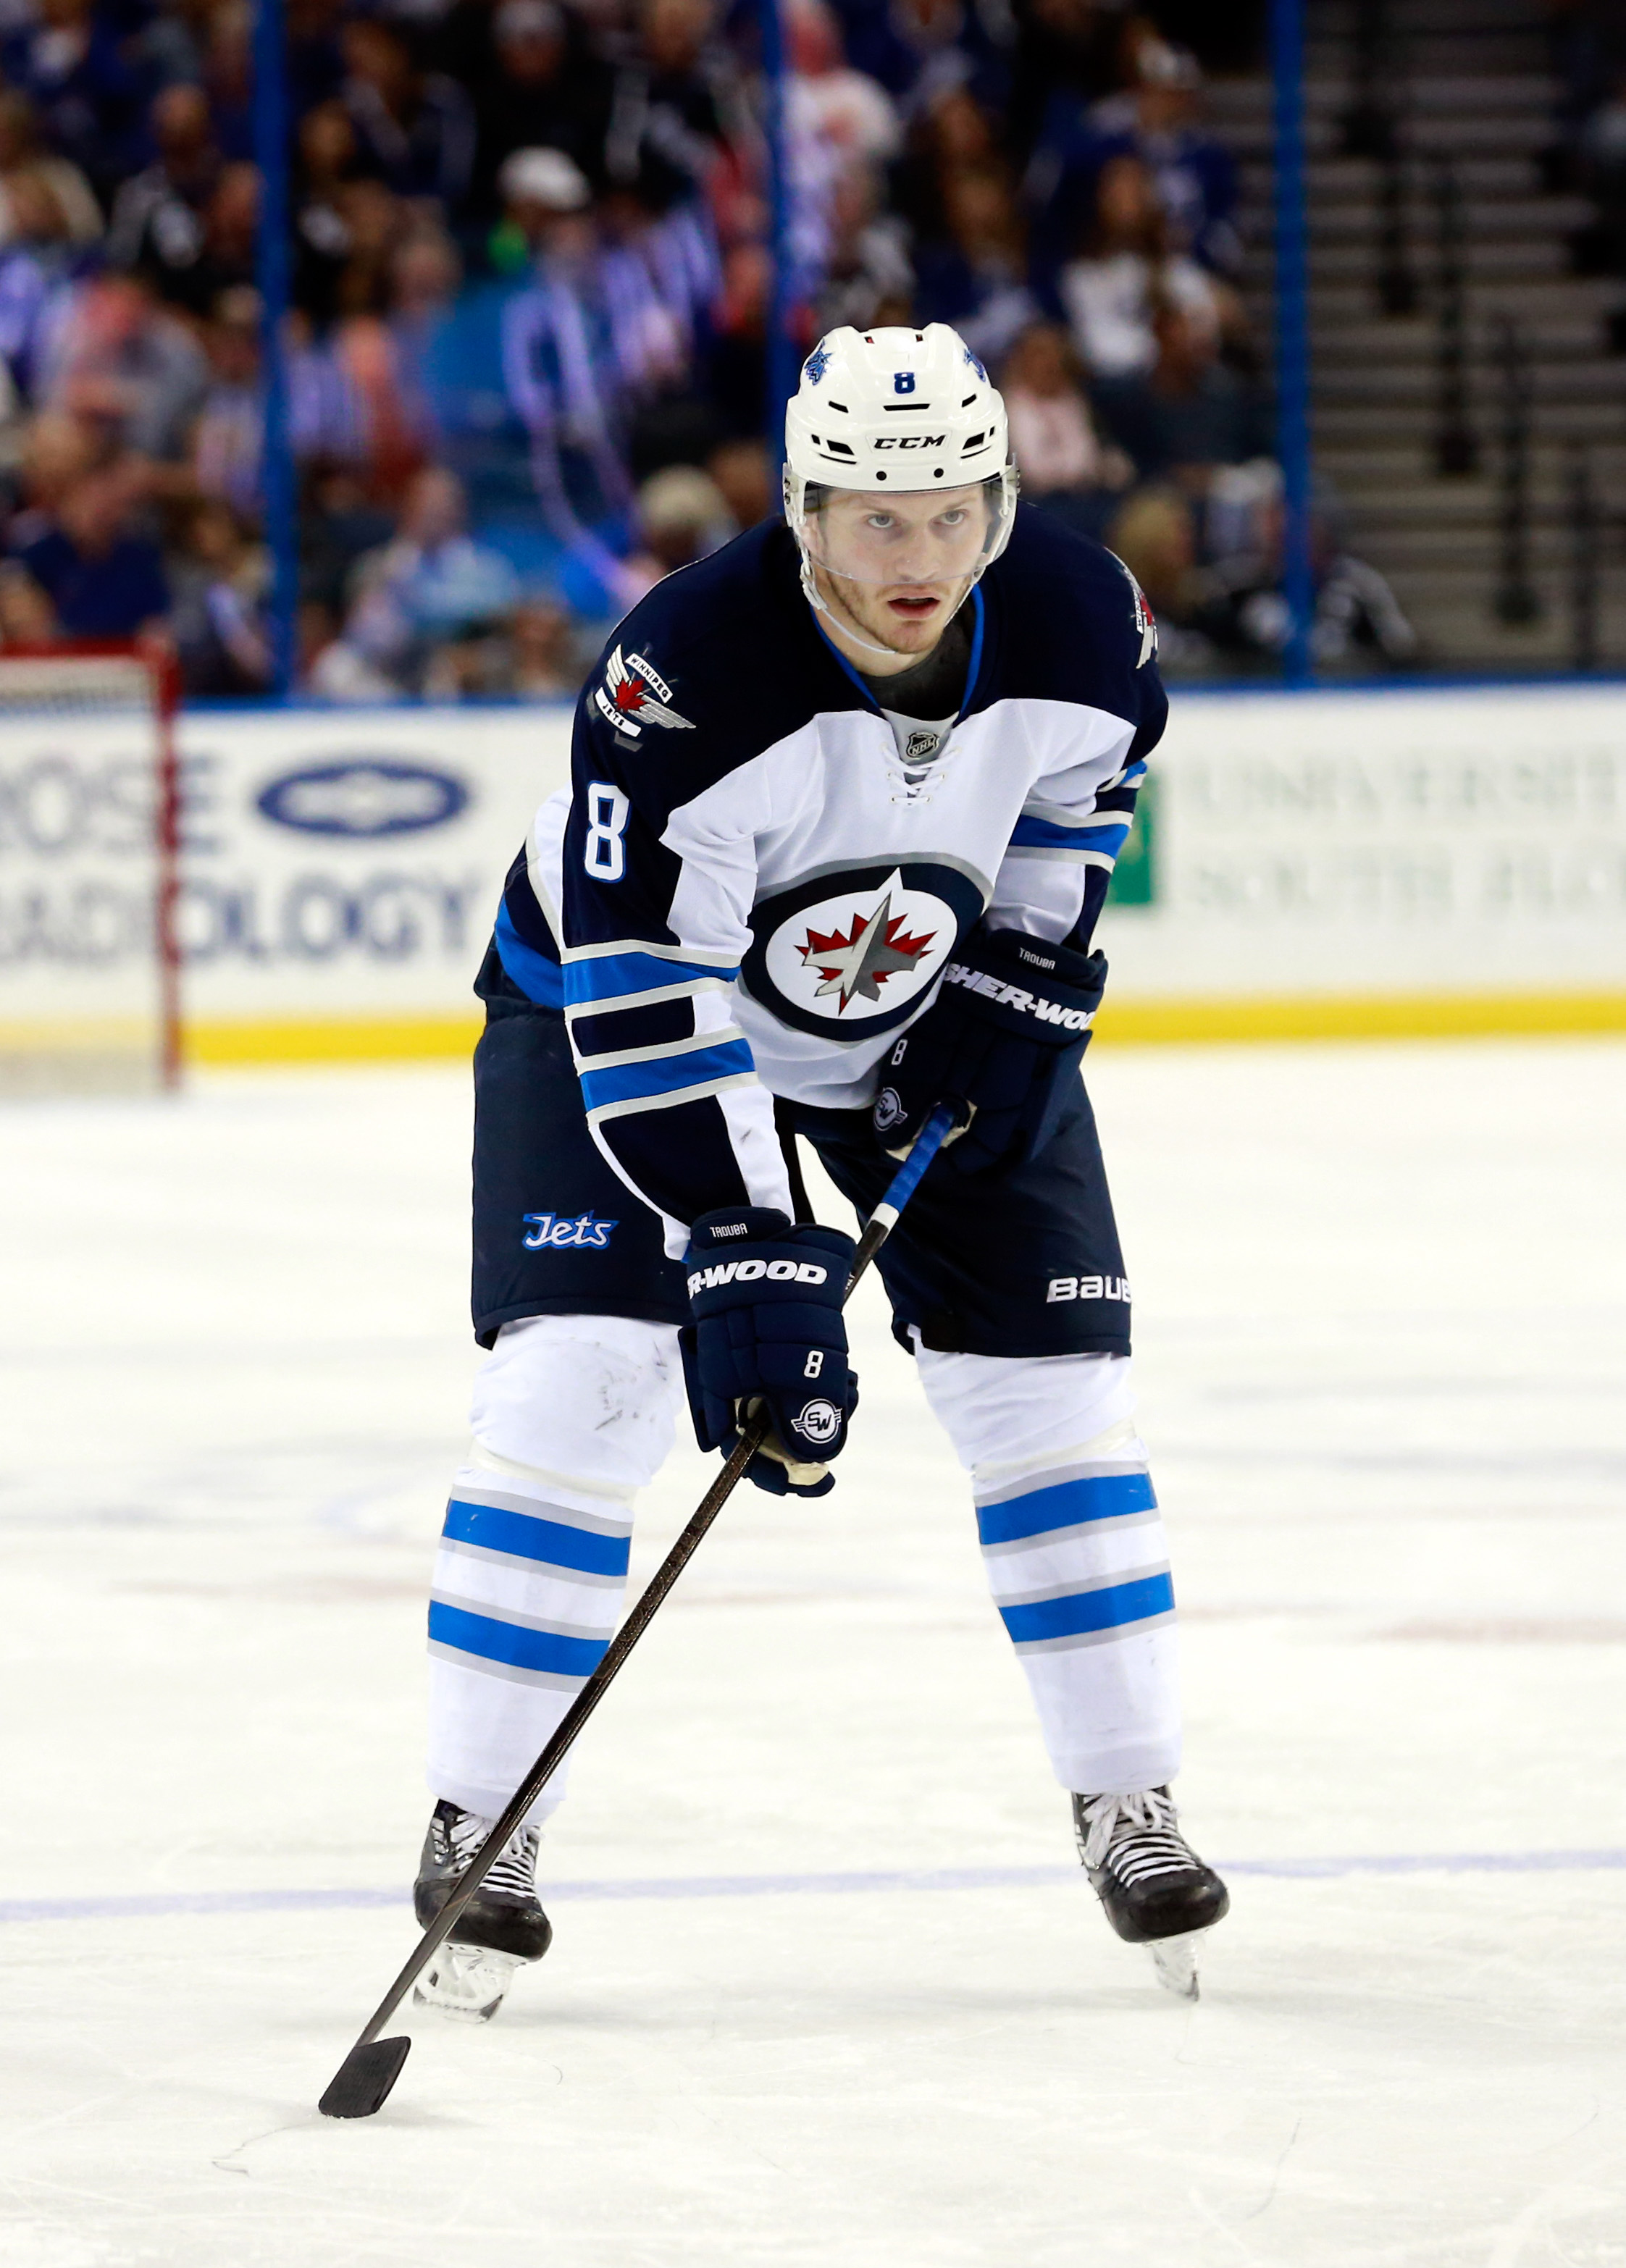 Report: Rochester's Jacob Trouba signs $56 million contract with